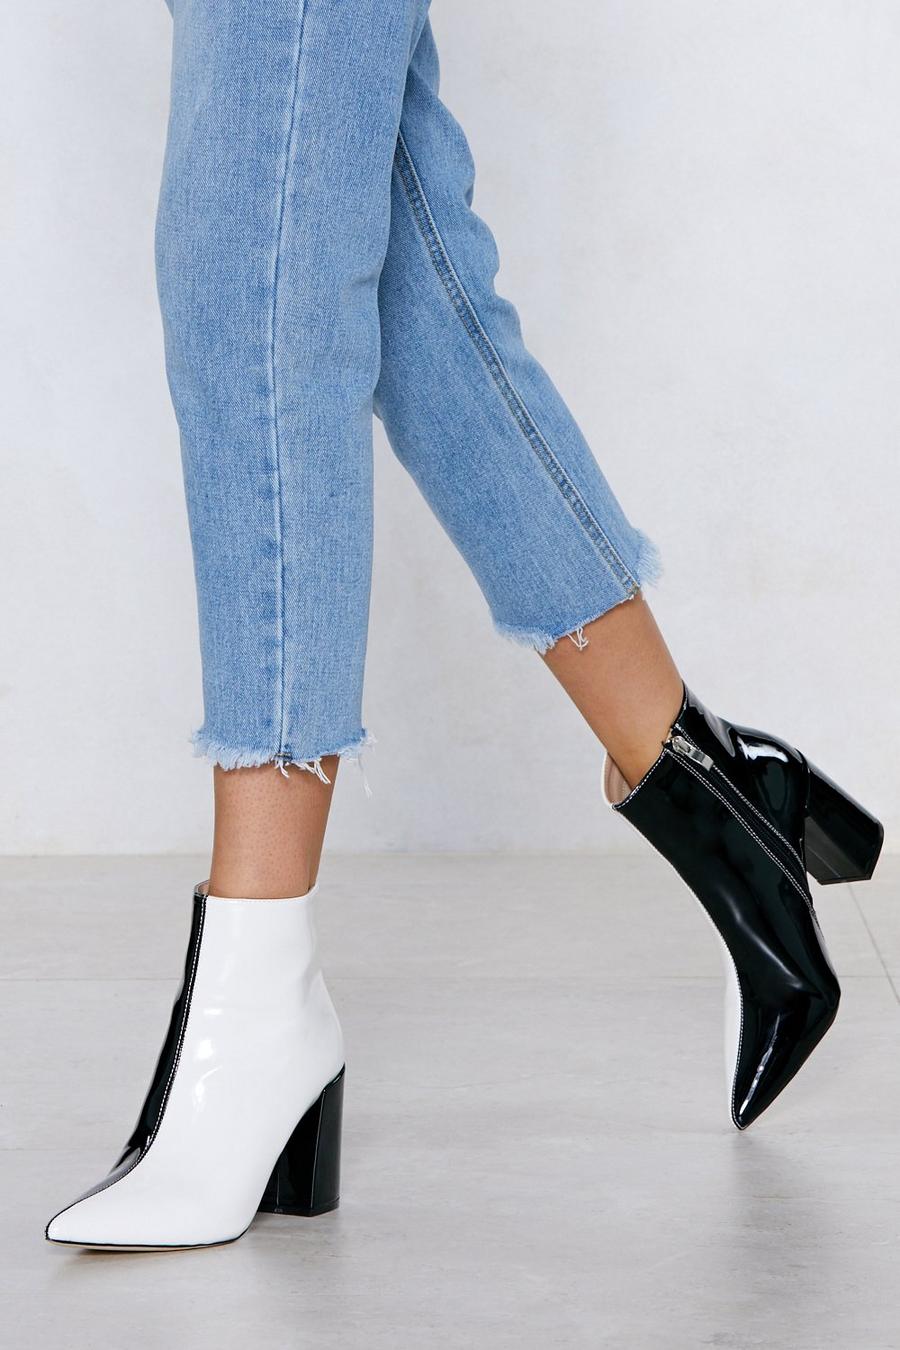 Ankle Boots |Women's Ankle Booties | Nasty Gal